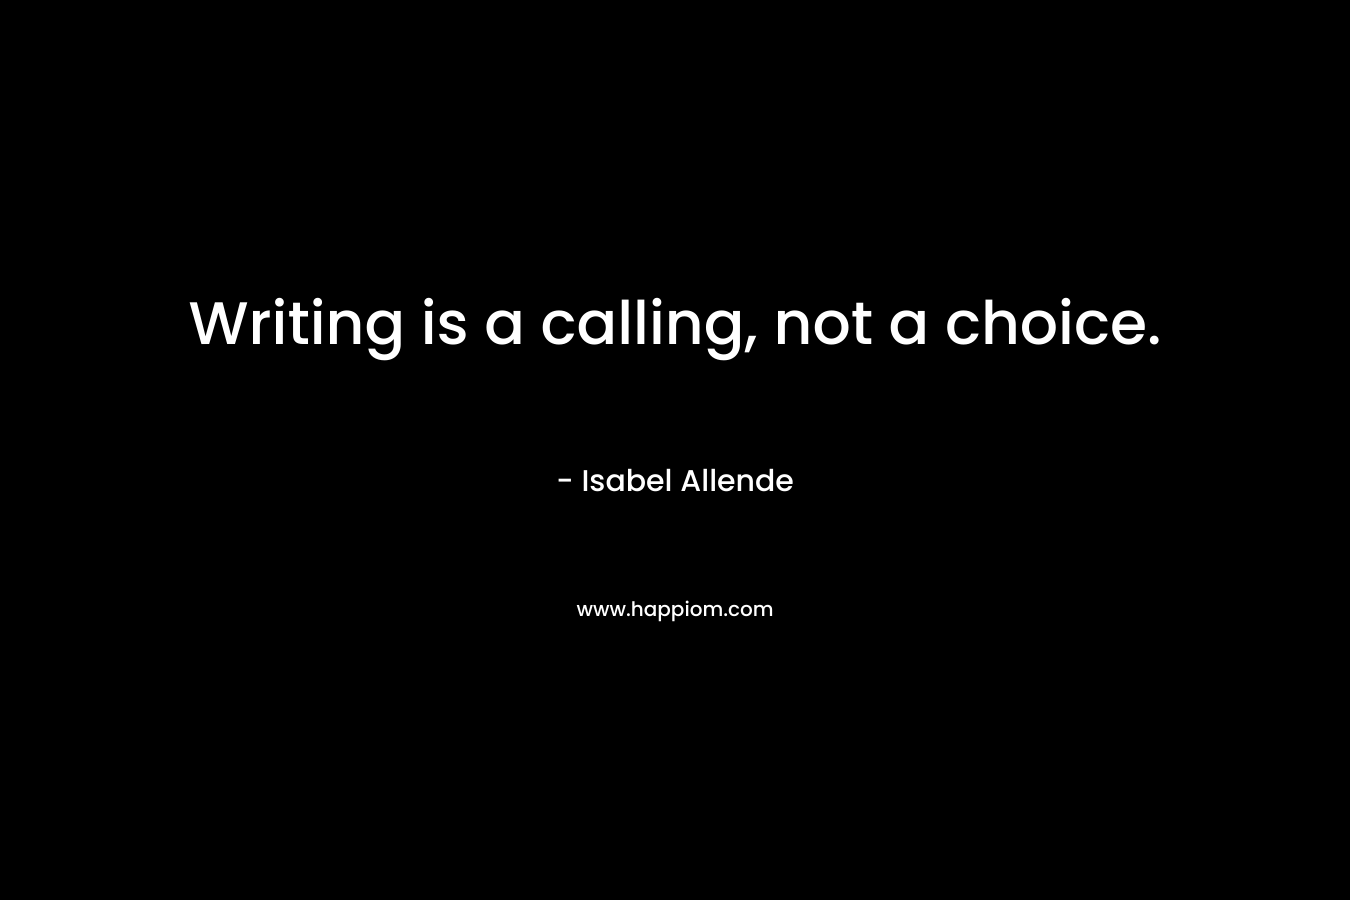 Writing is a calling, not a choice. – Isabel Allende